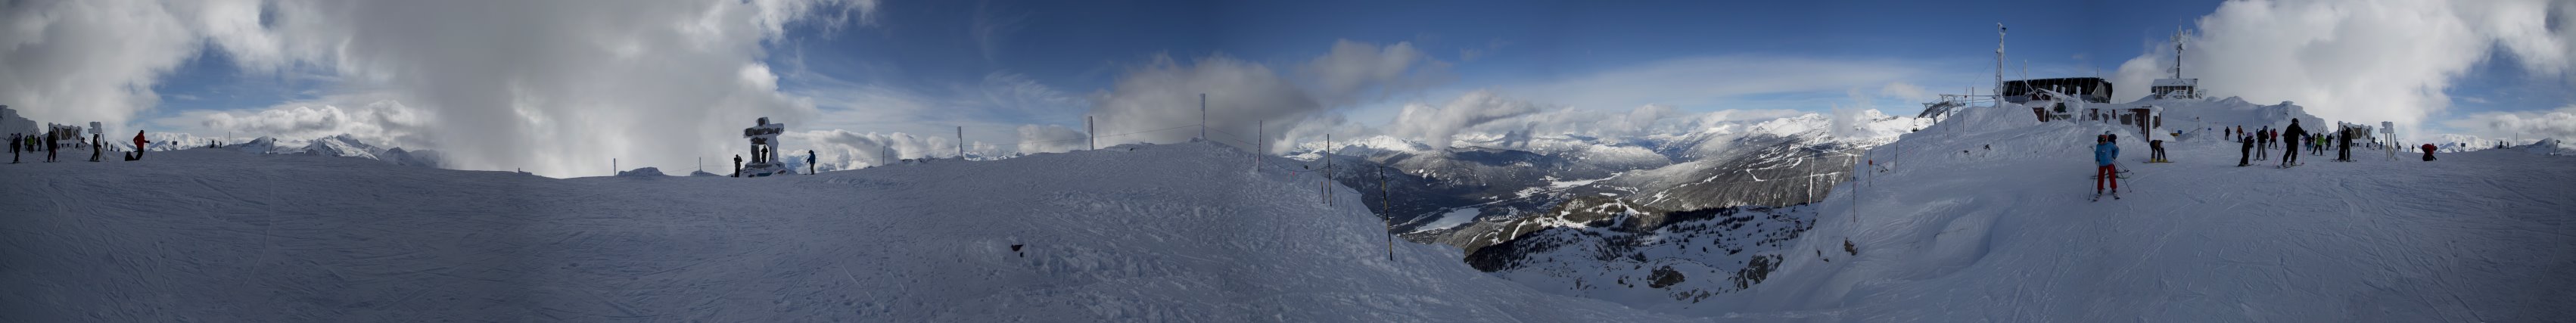 Alin Constantin's Photography - Vacation at Whistler - Whistler peak
(Click on the picture for the full-size version)